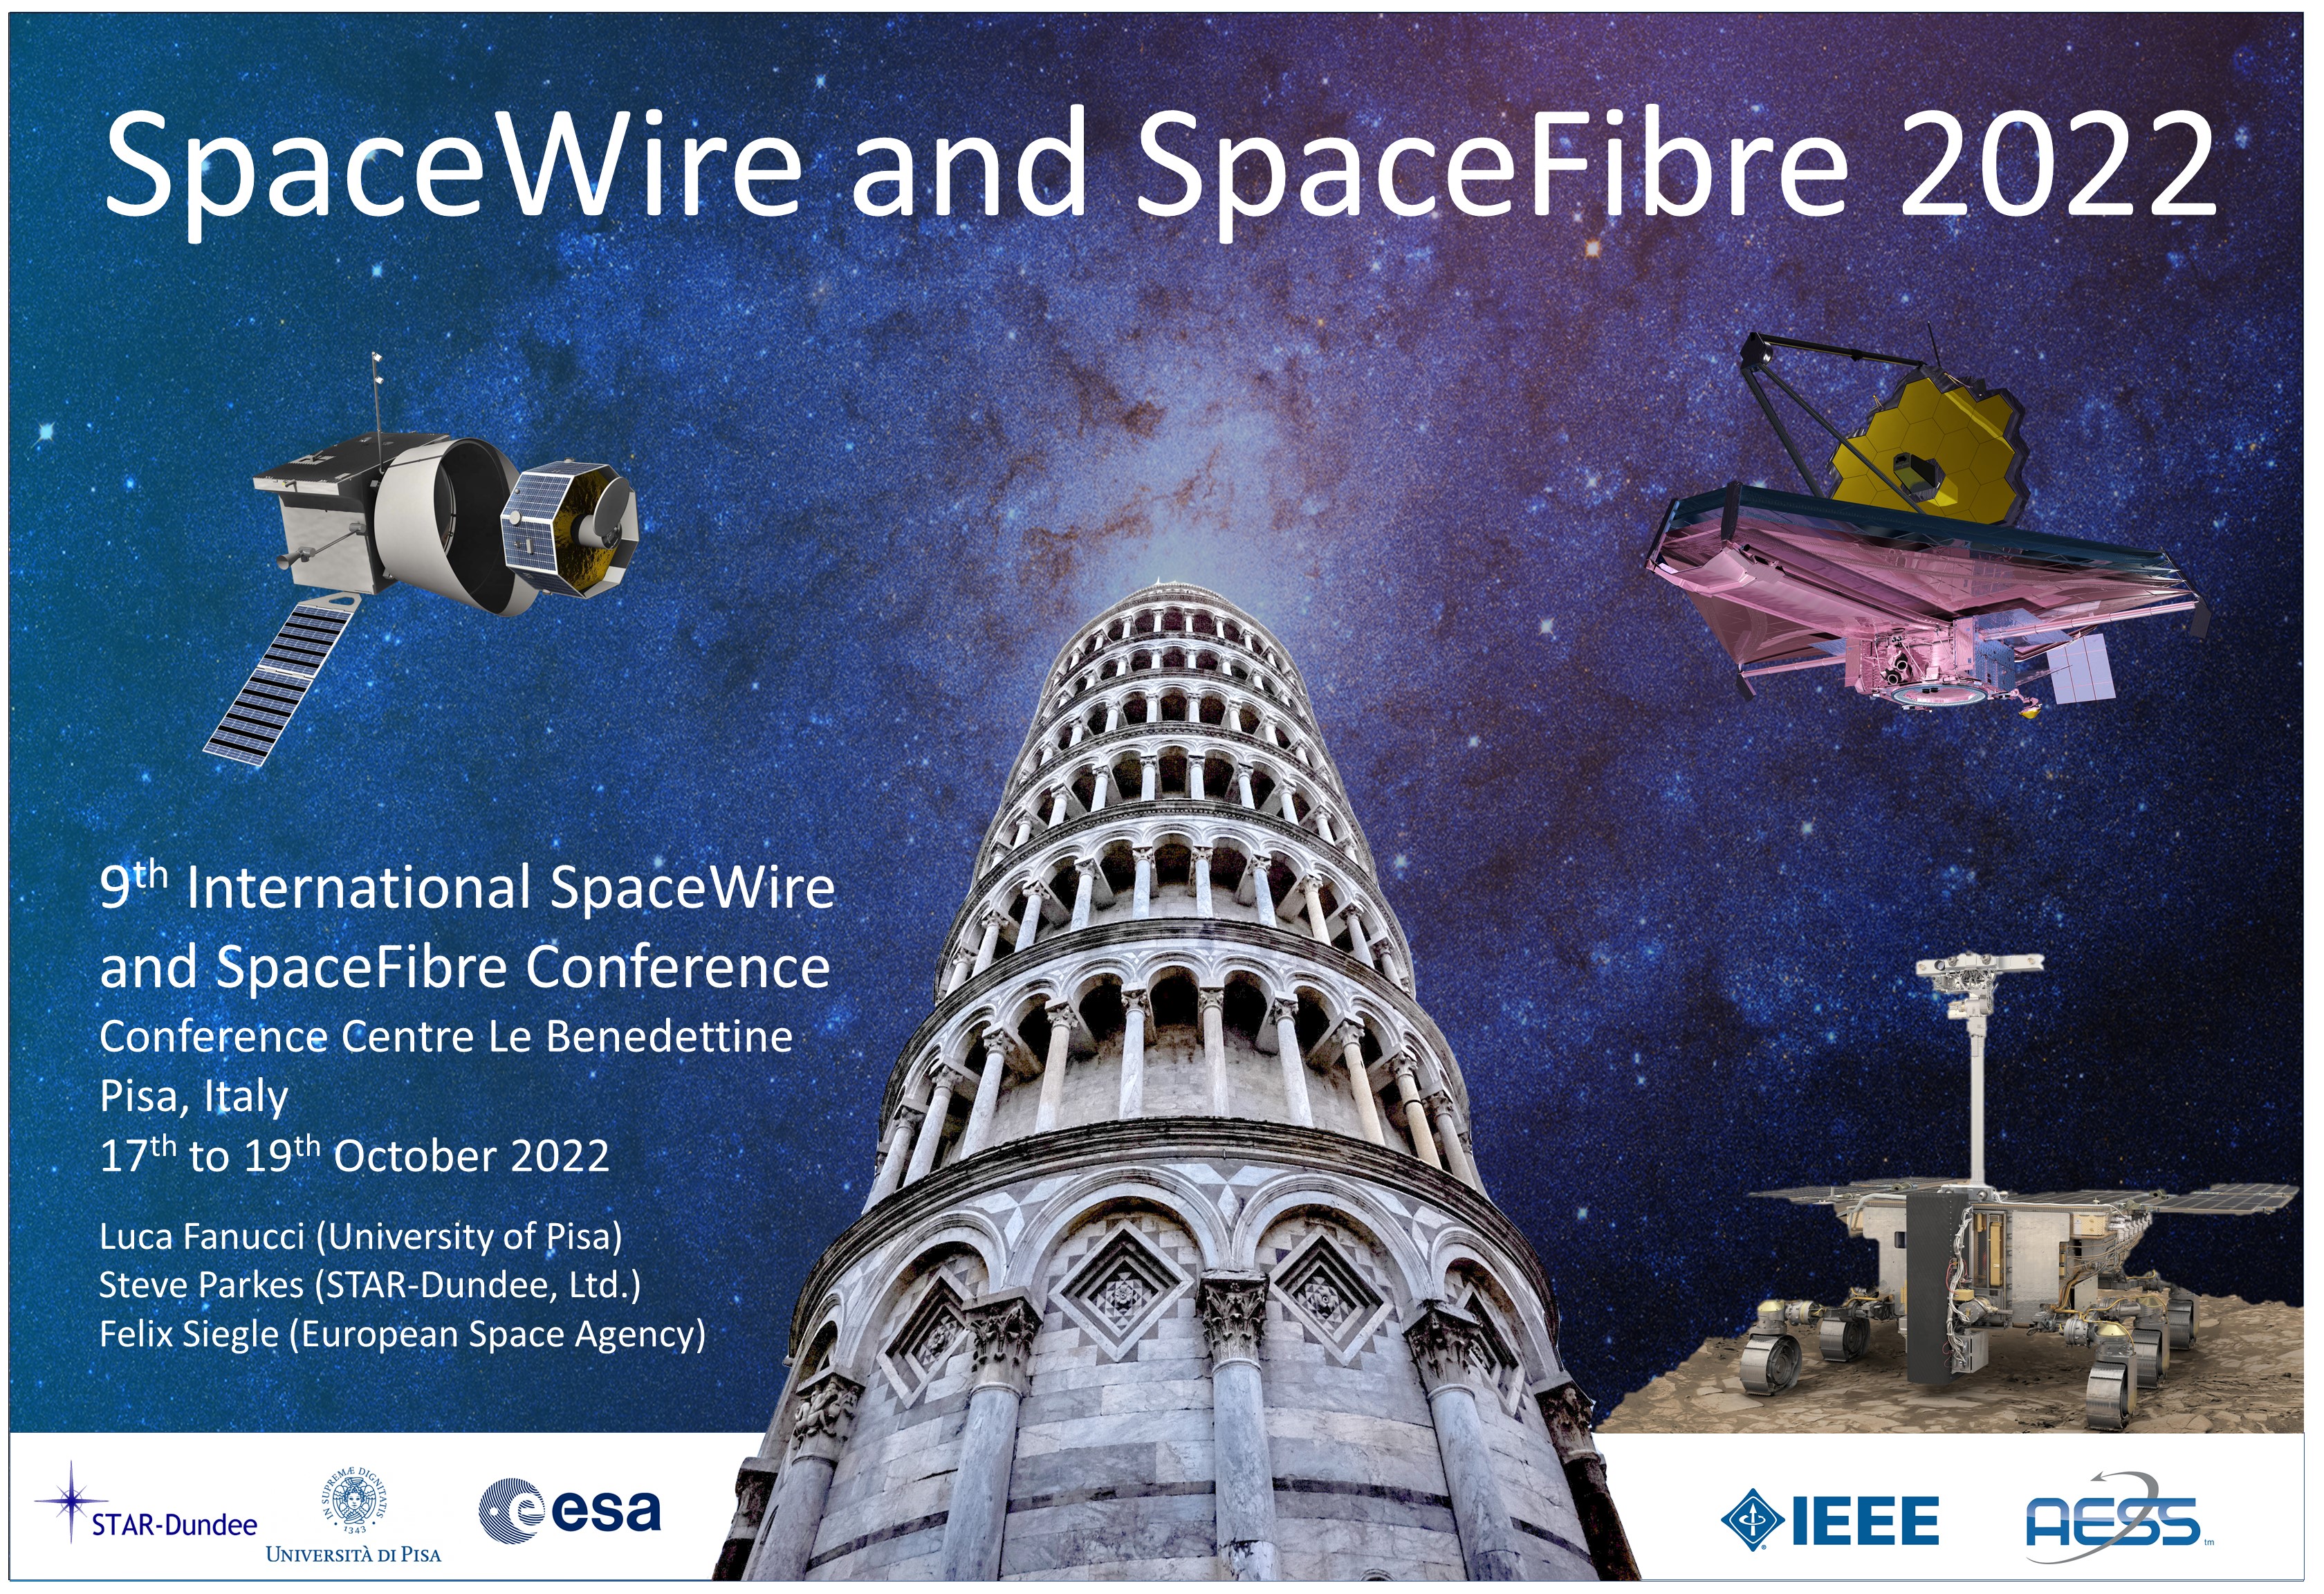 SpaceWire and SpaceFibre Conference 2022 Poster